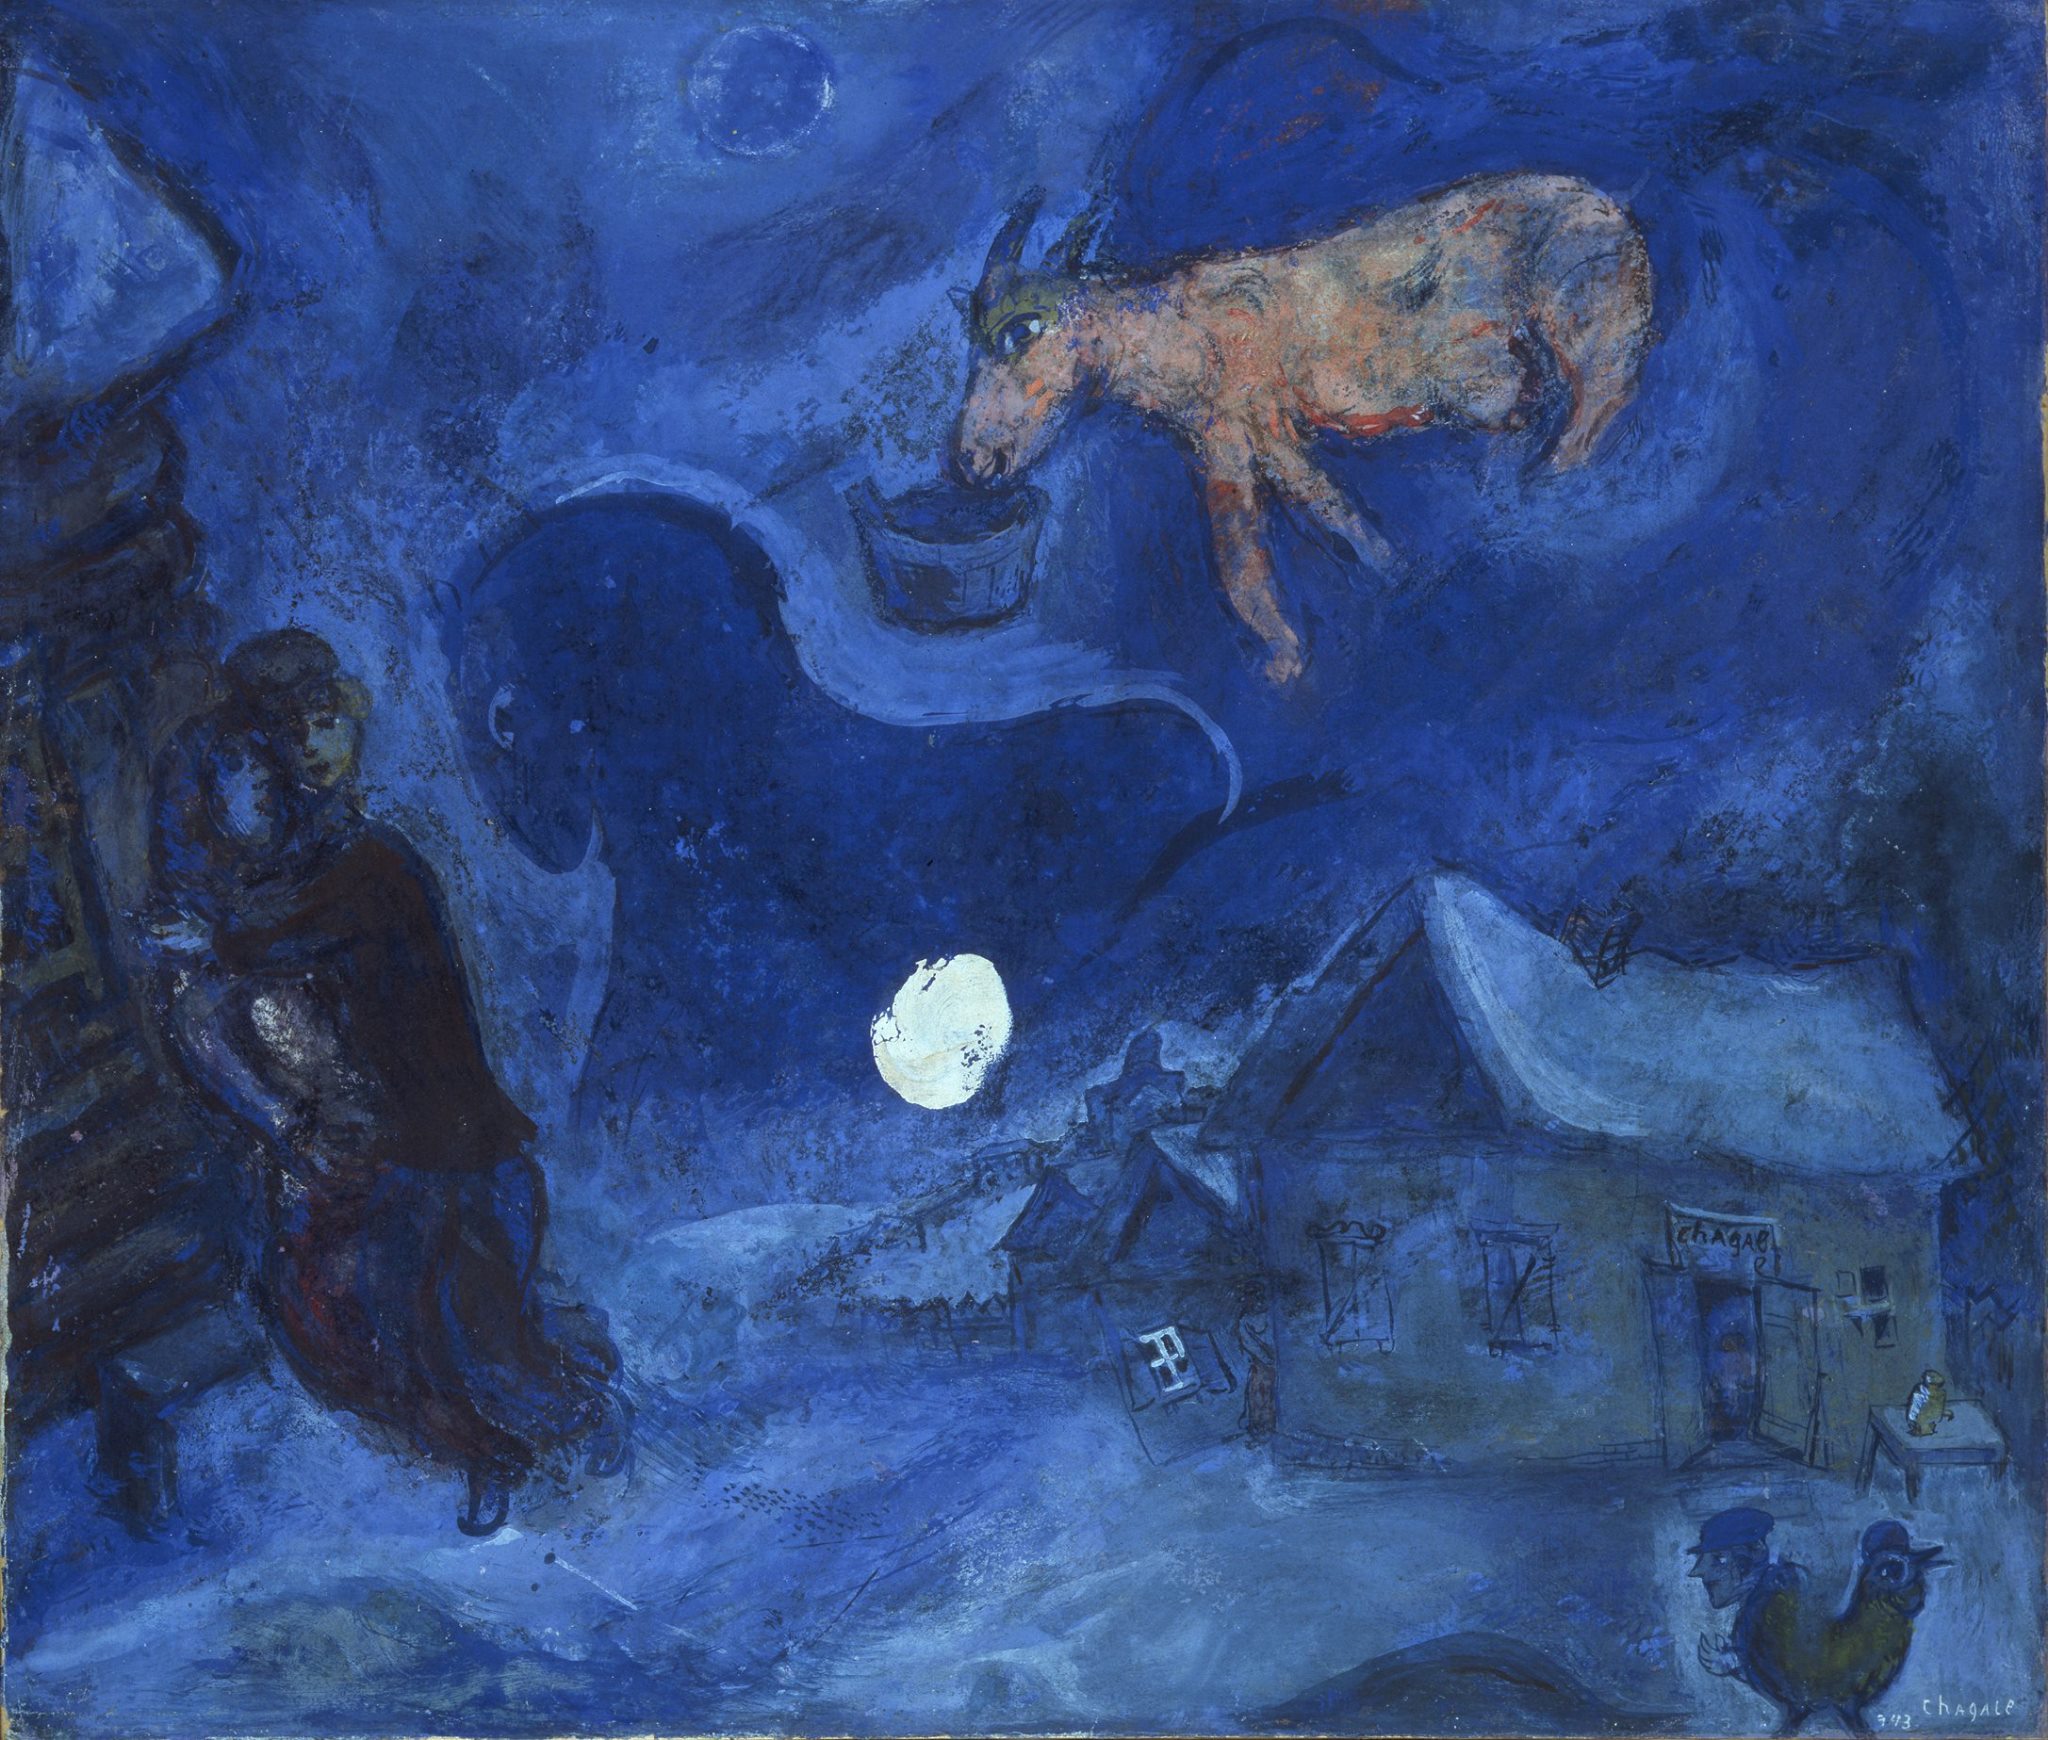 Dans Mon Pays by Marc Chagall - 1943 